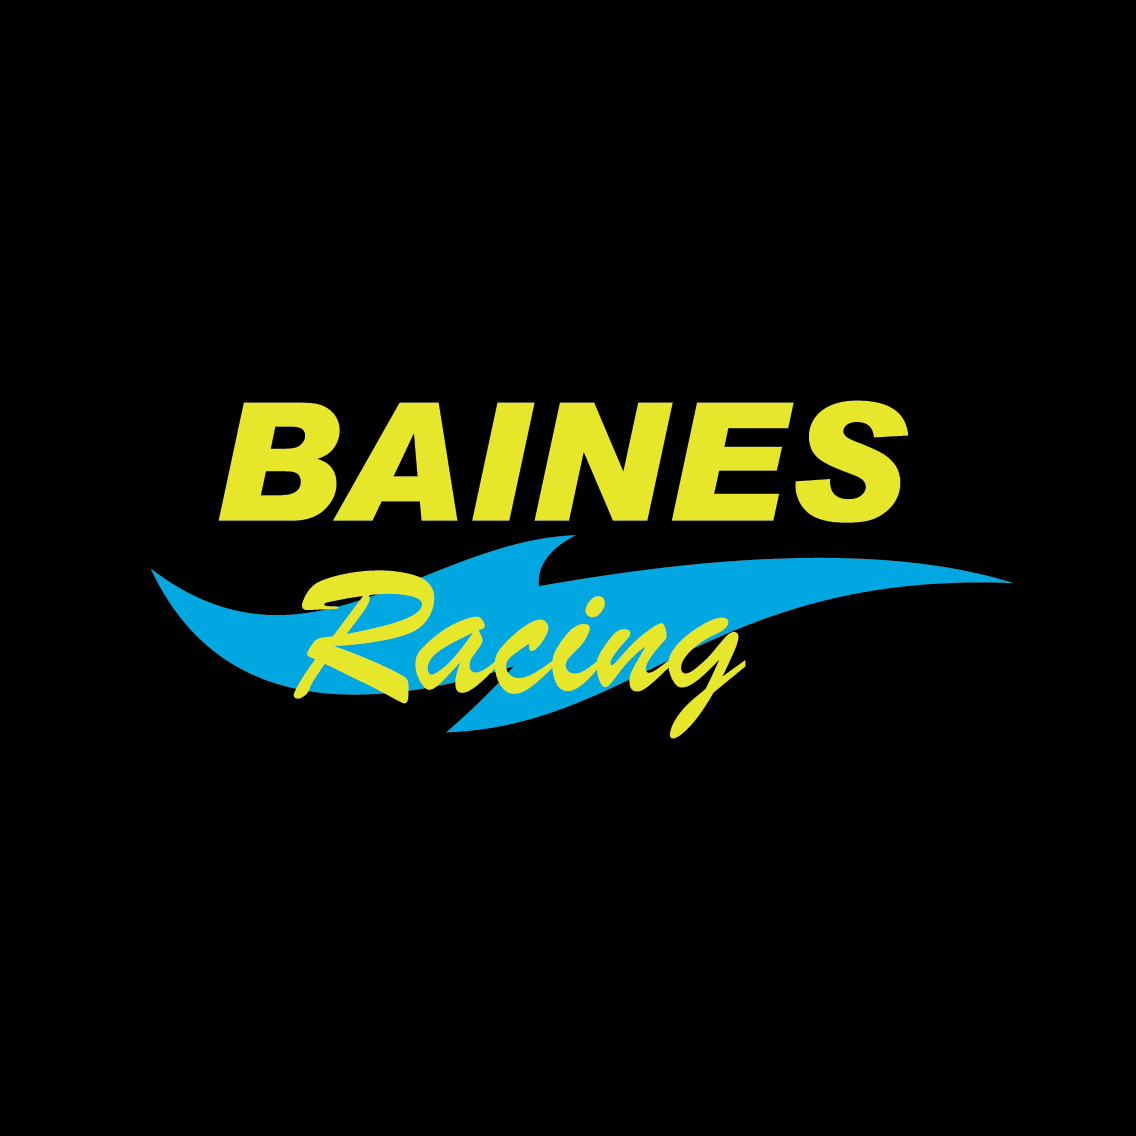 Club Image for BAINES RACING